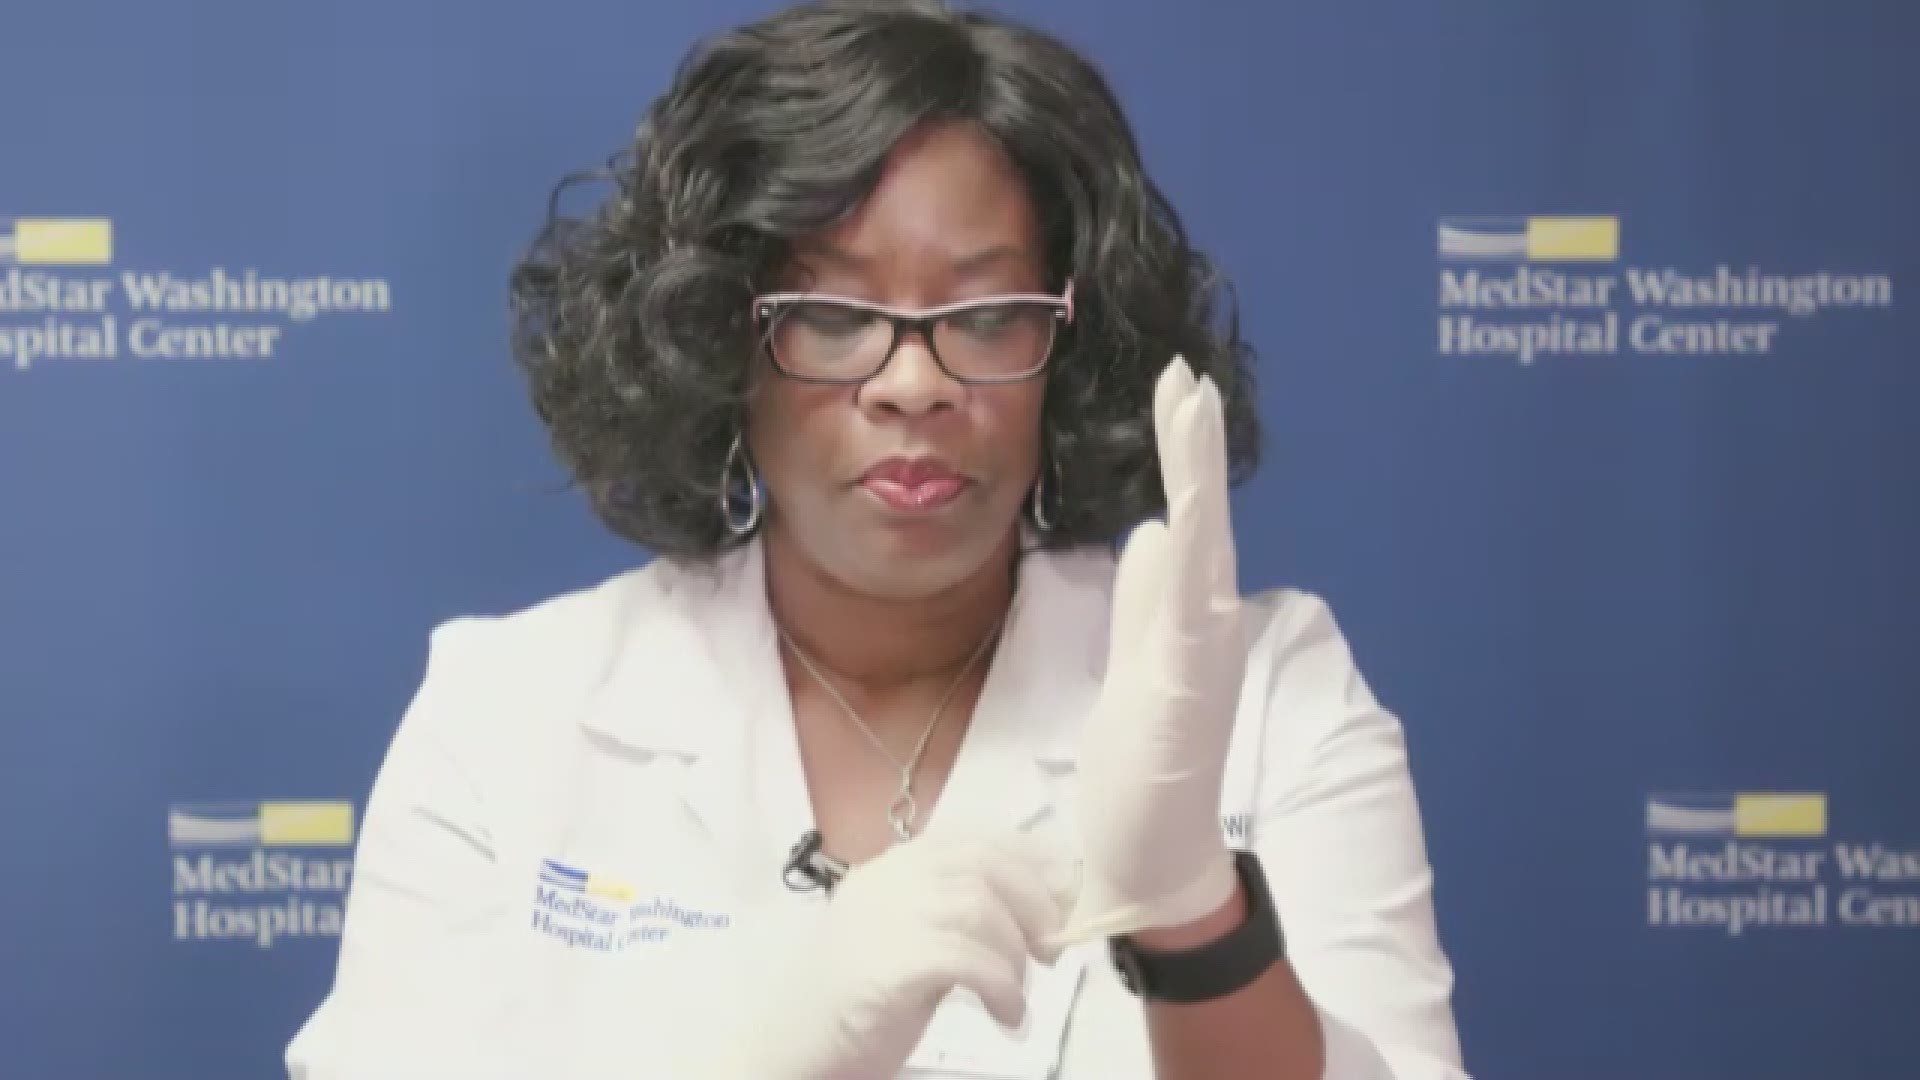 MedStar Washintgon Hospital Center's director of infection control and prevention Pam Farrare-Wilmore demonstrates how to properly take off disposable gloves.